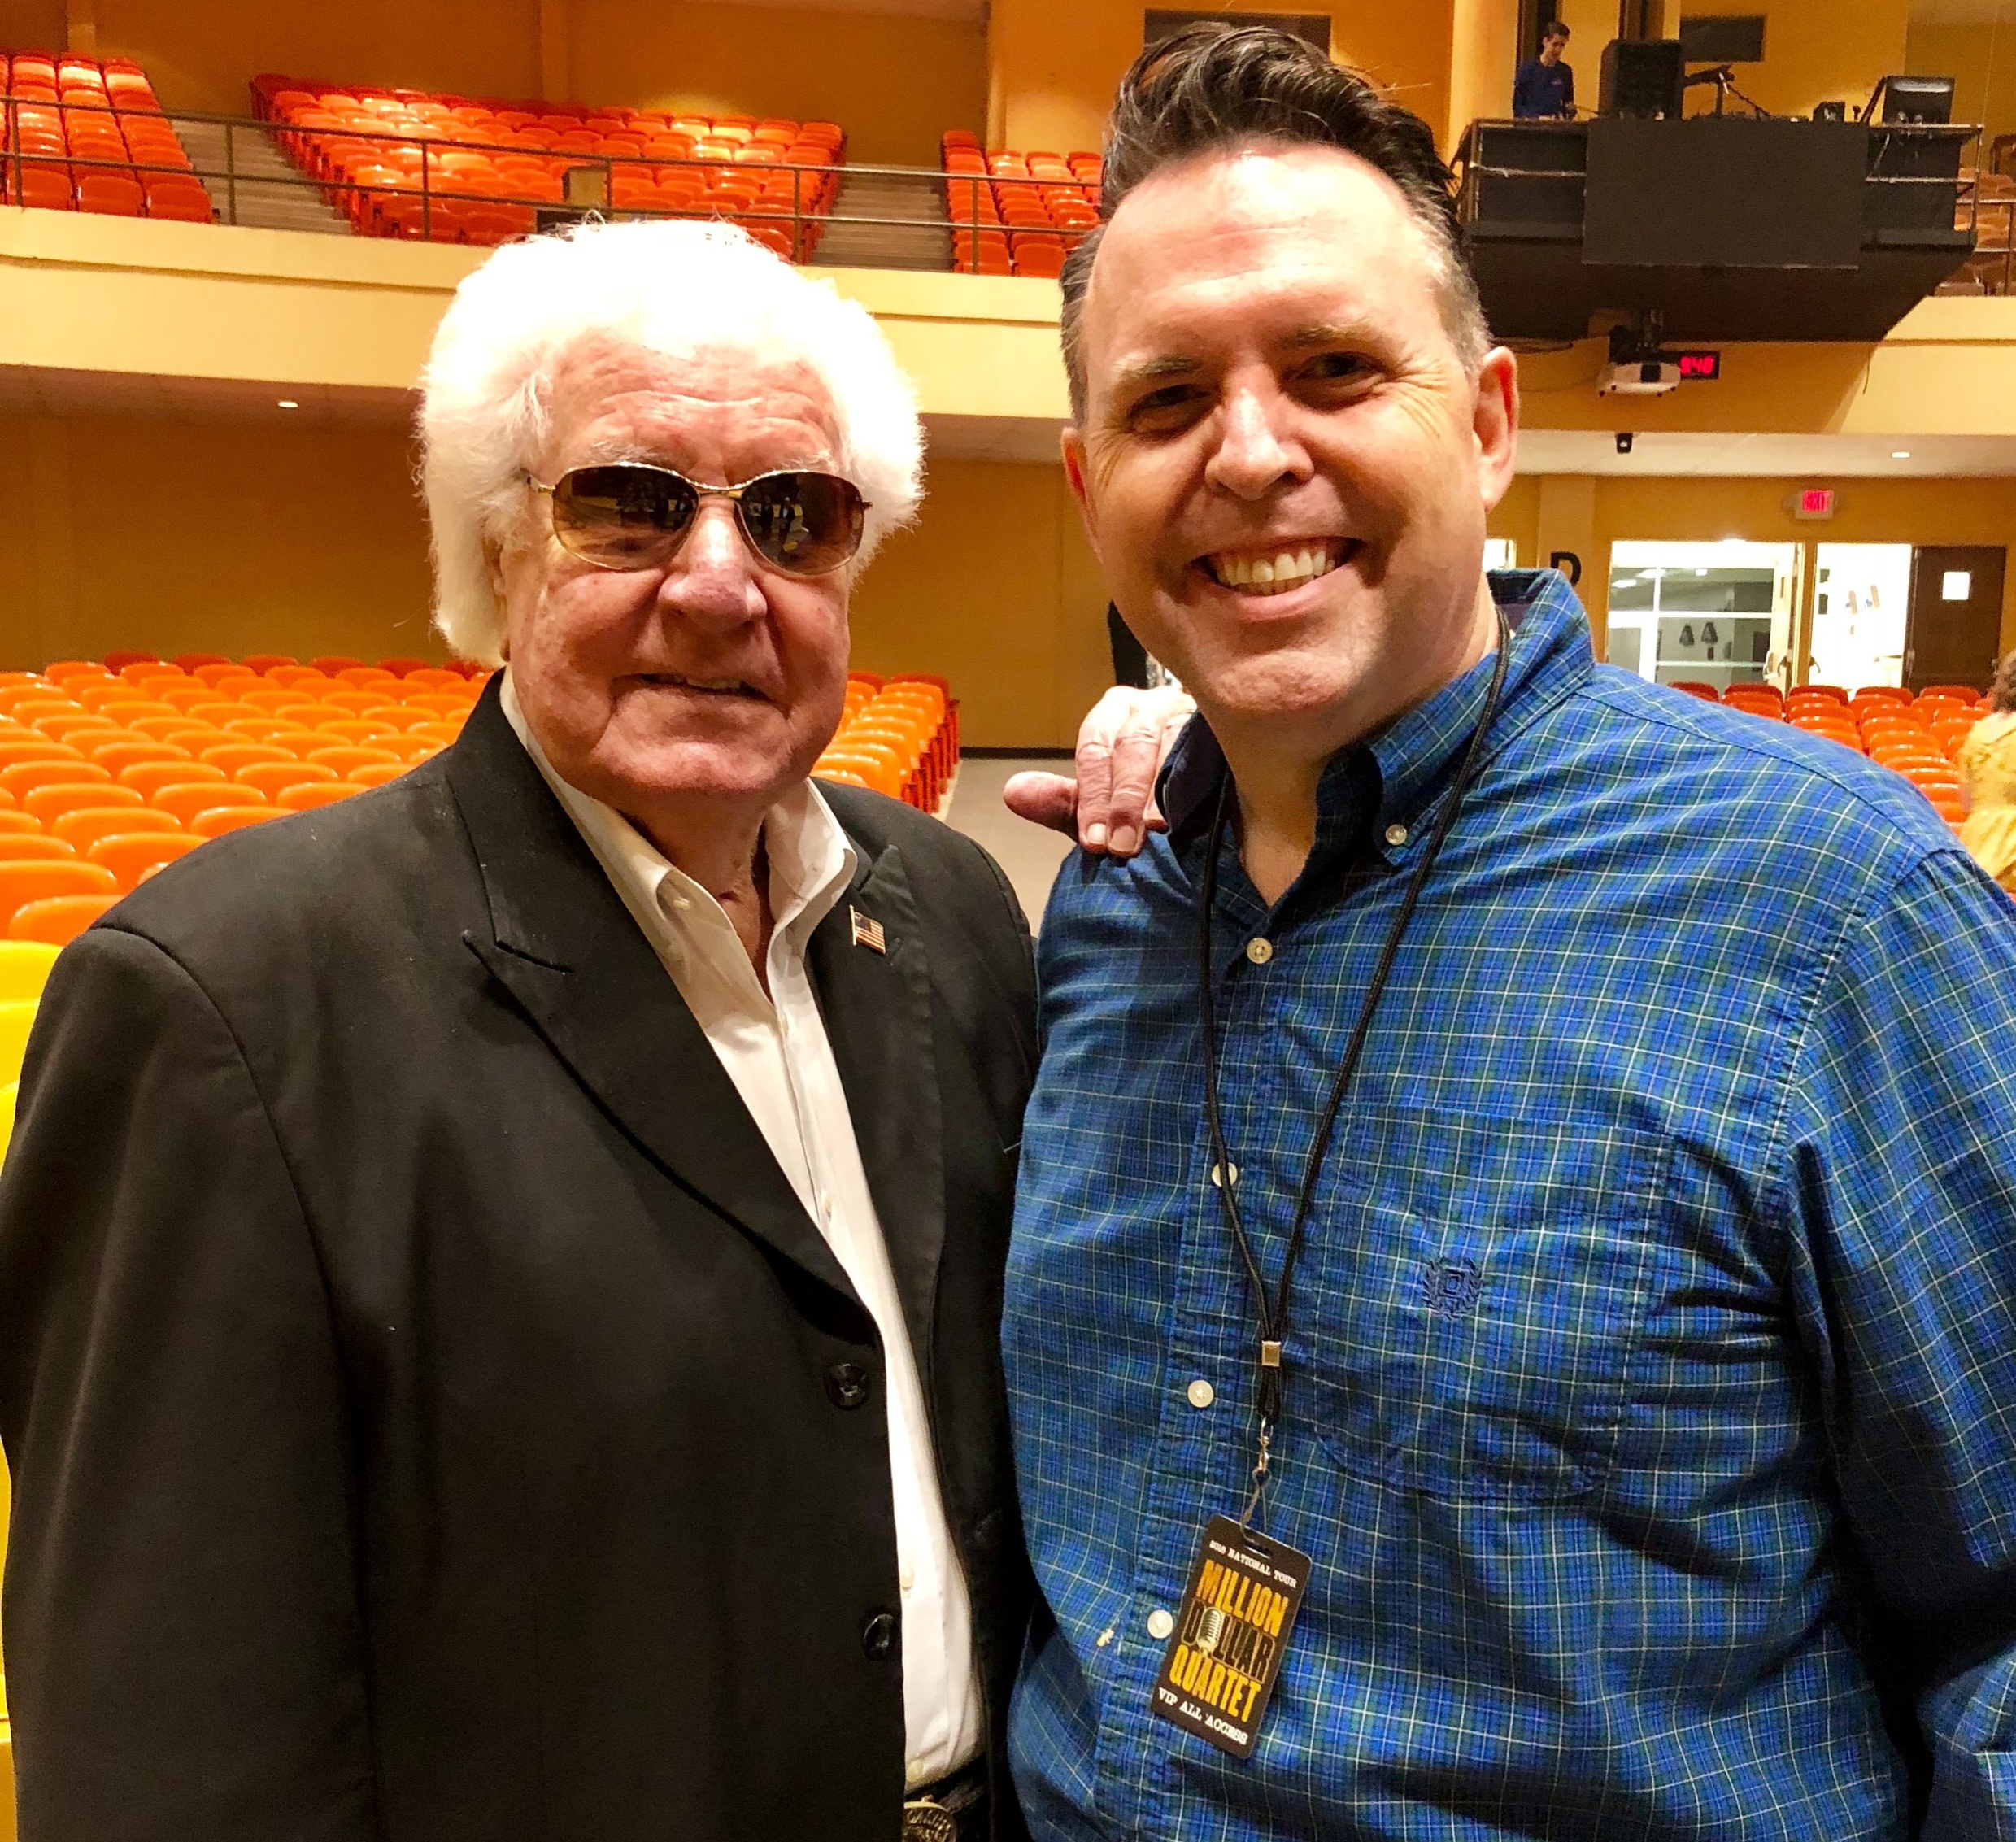 Fluke Holland (drummer in the actual Million Dollar Quartet session) visiting the show in Tenn.